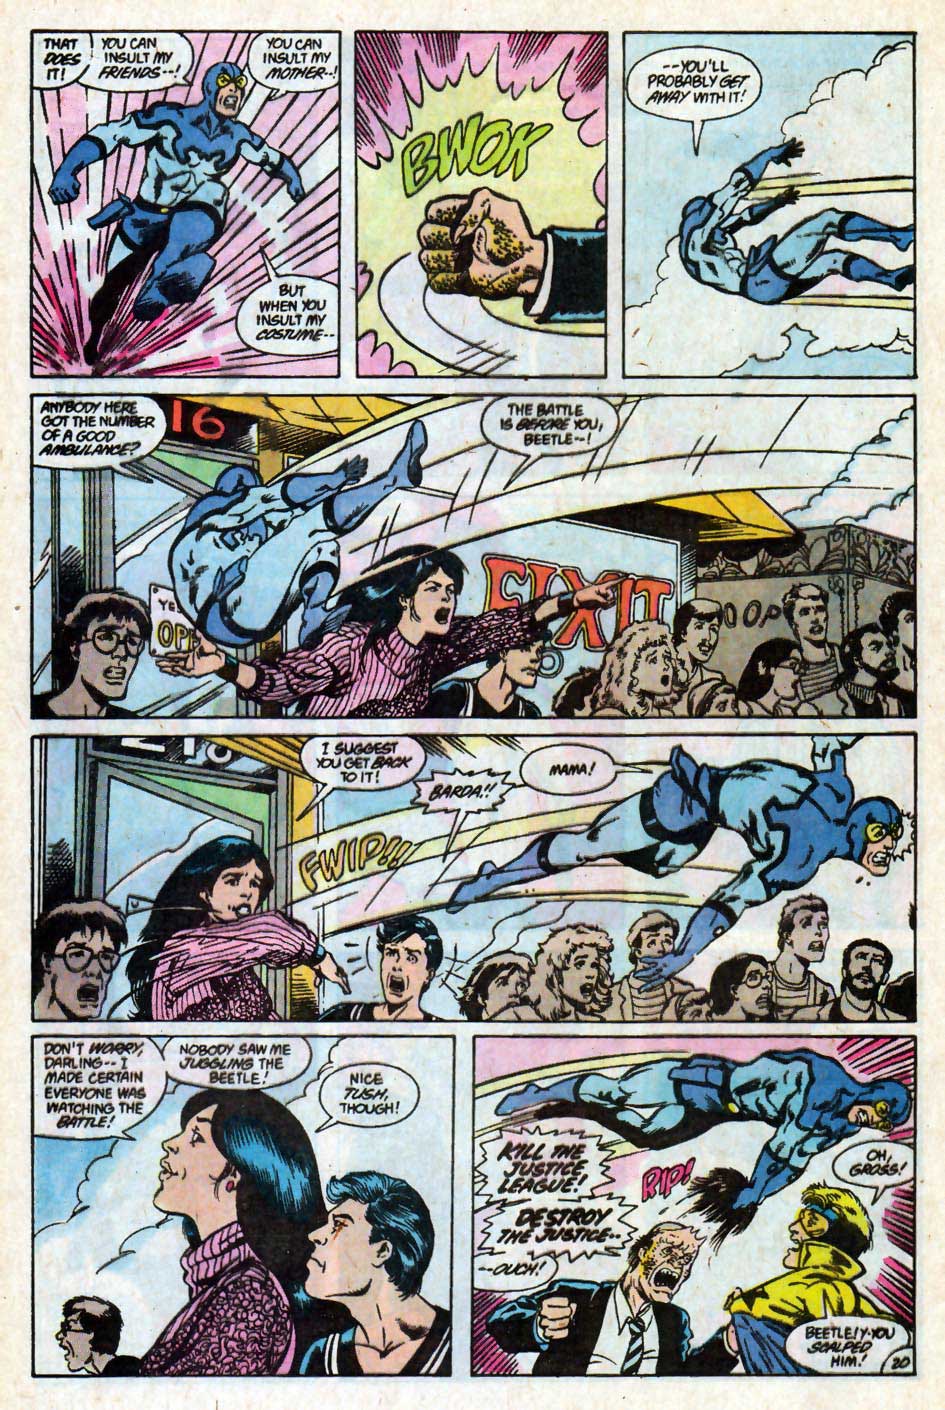 Mister Miracle #7 - Plot by J. M. DeMatteis, Script by Len Wein, art by Joe Phillips and Pablo Marcos